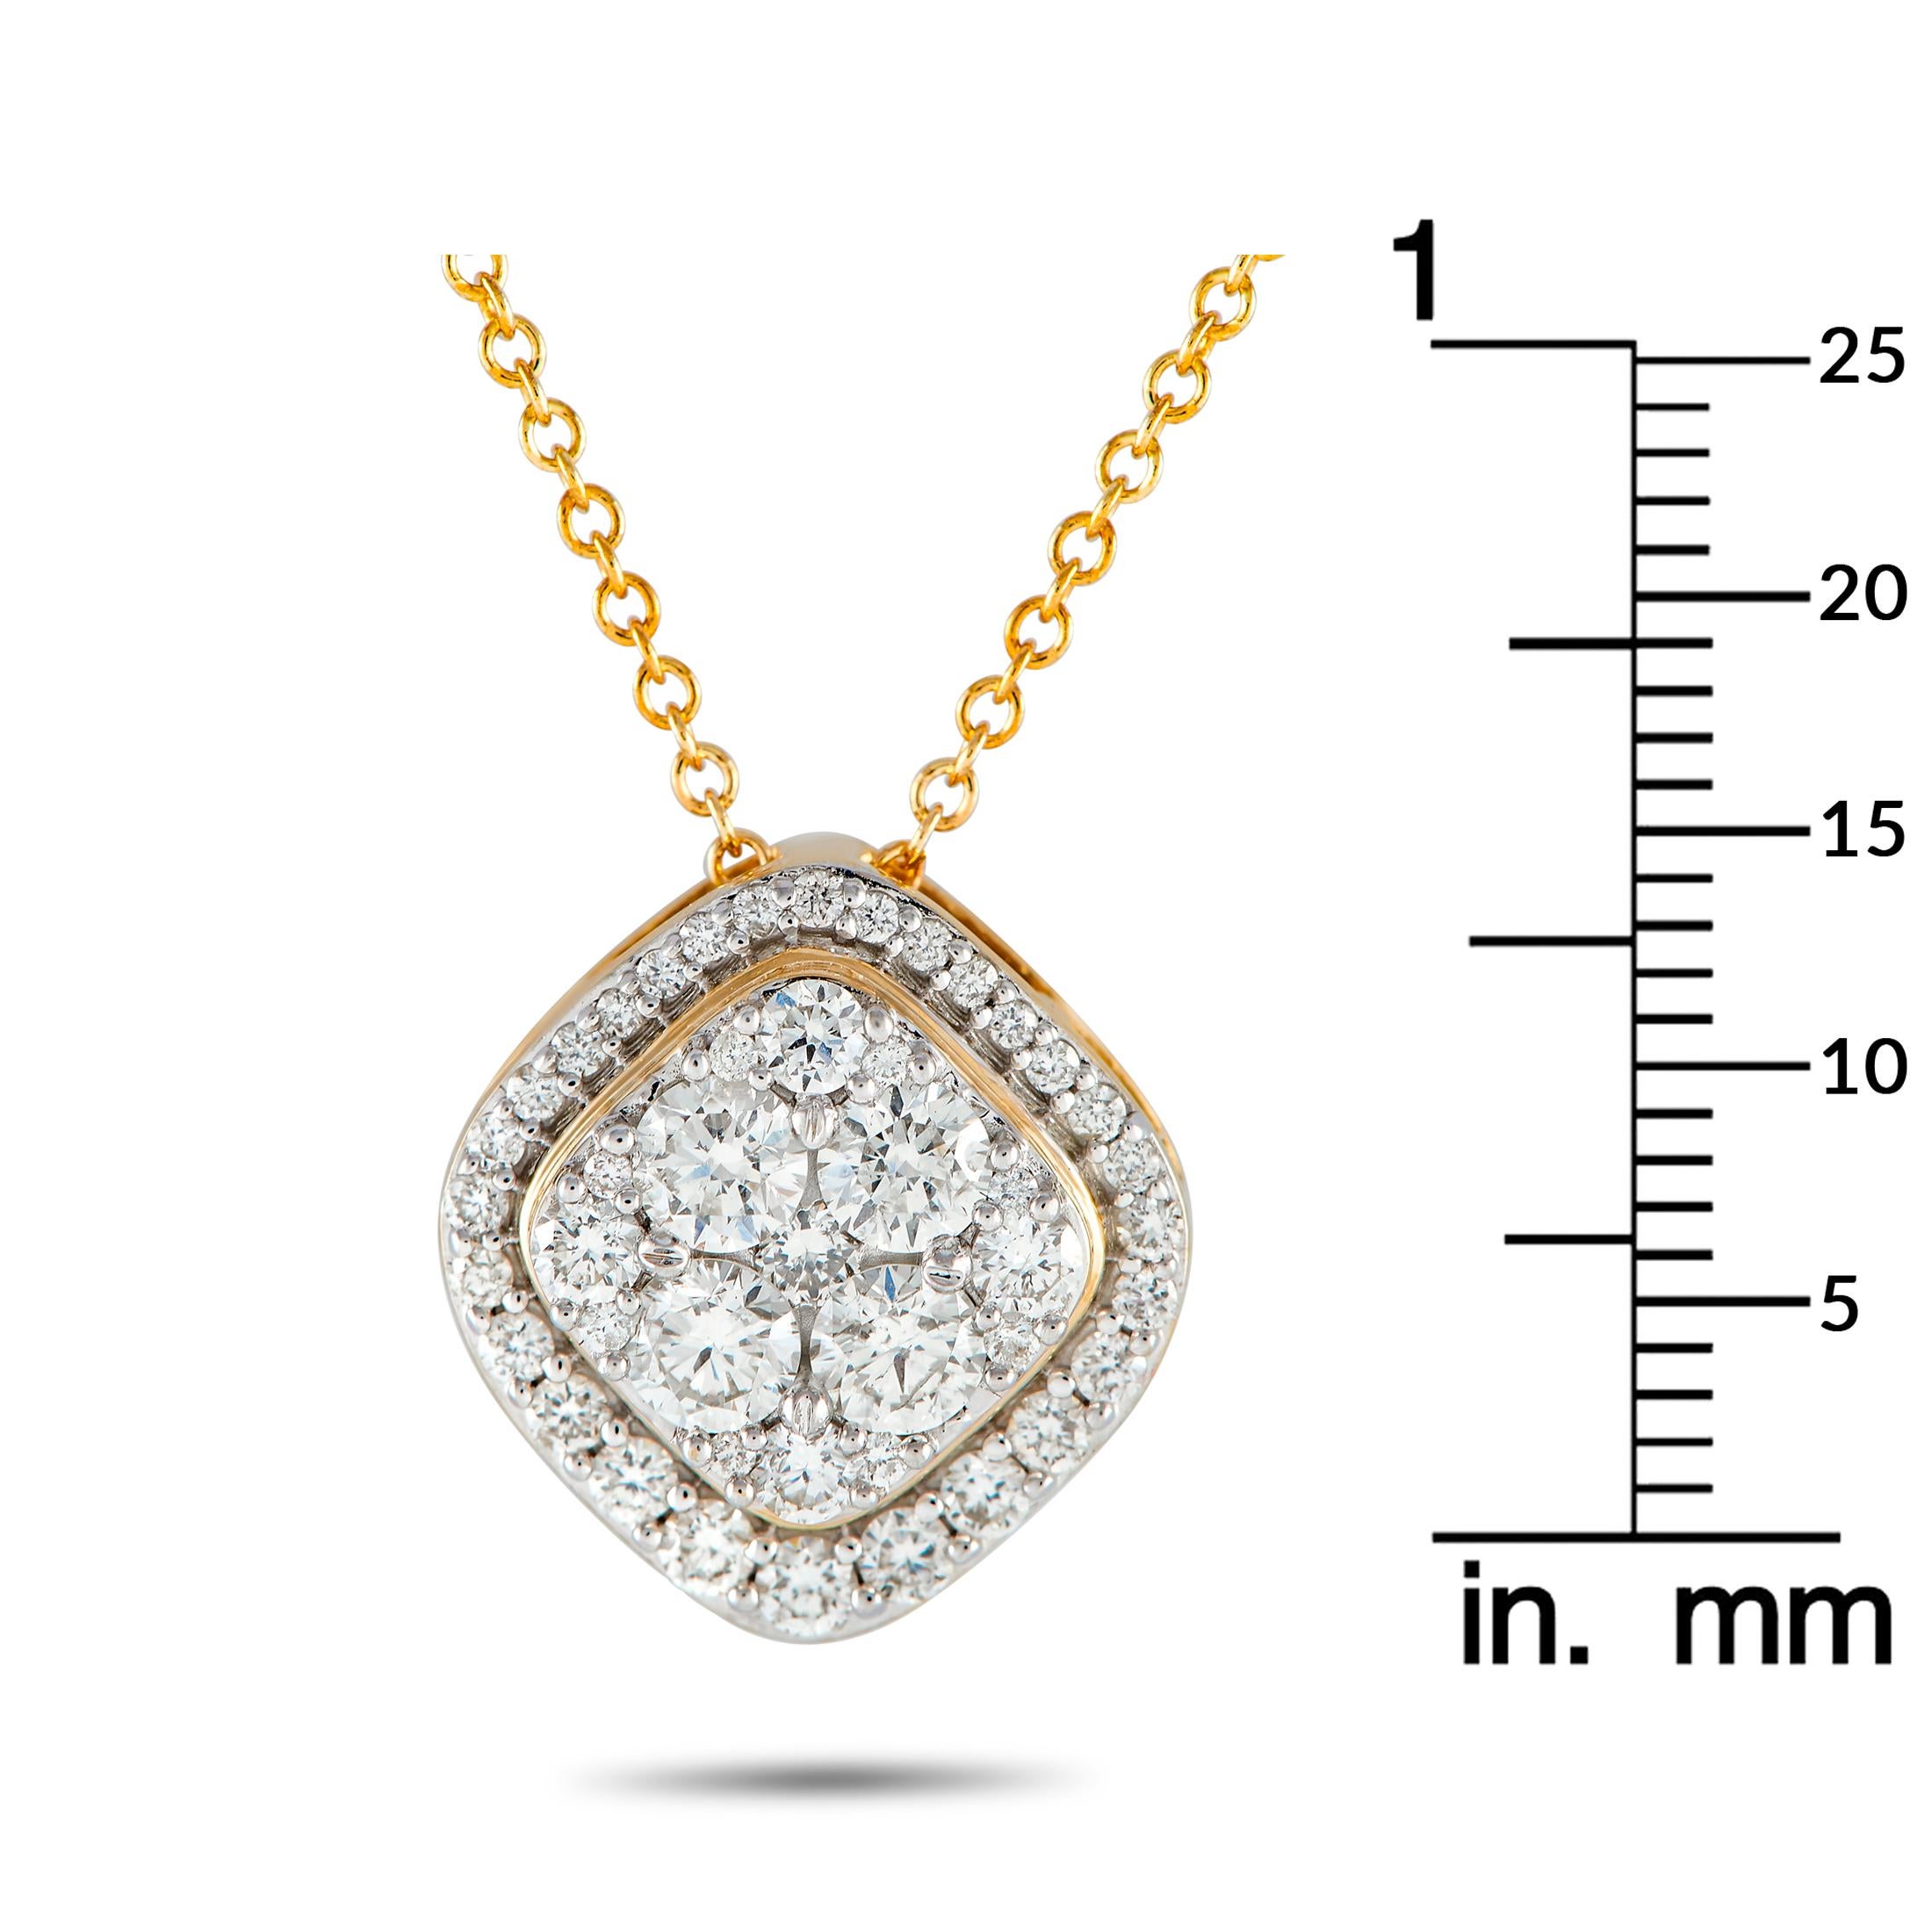 LB Exclusive 14k Yellow Gold 1.0 Carat Diamond Necklace In New Condition For Sale In Southampton, PA